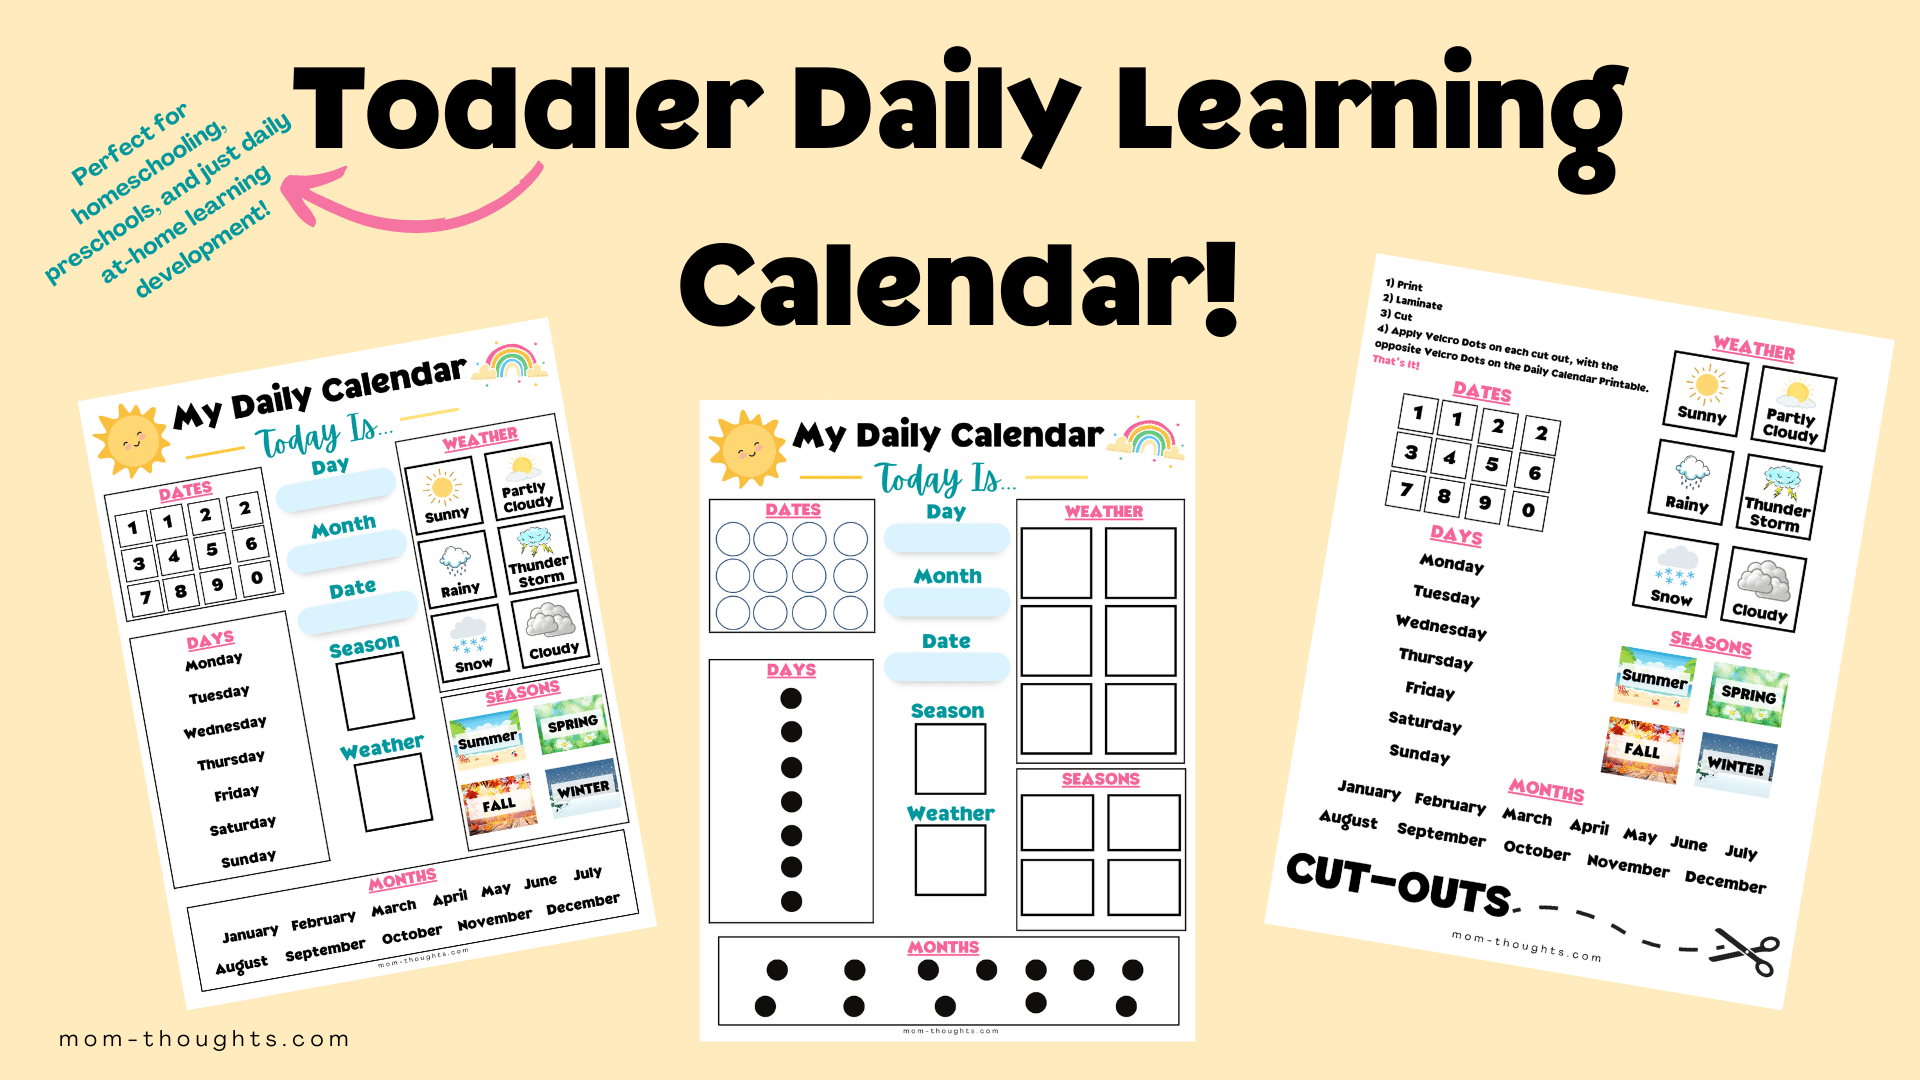 Daily Toddler Calendar-Inspired By Preschool Classrooms! - Mom-Thoughts